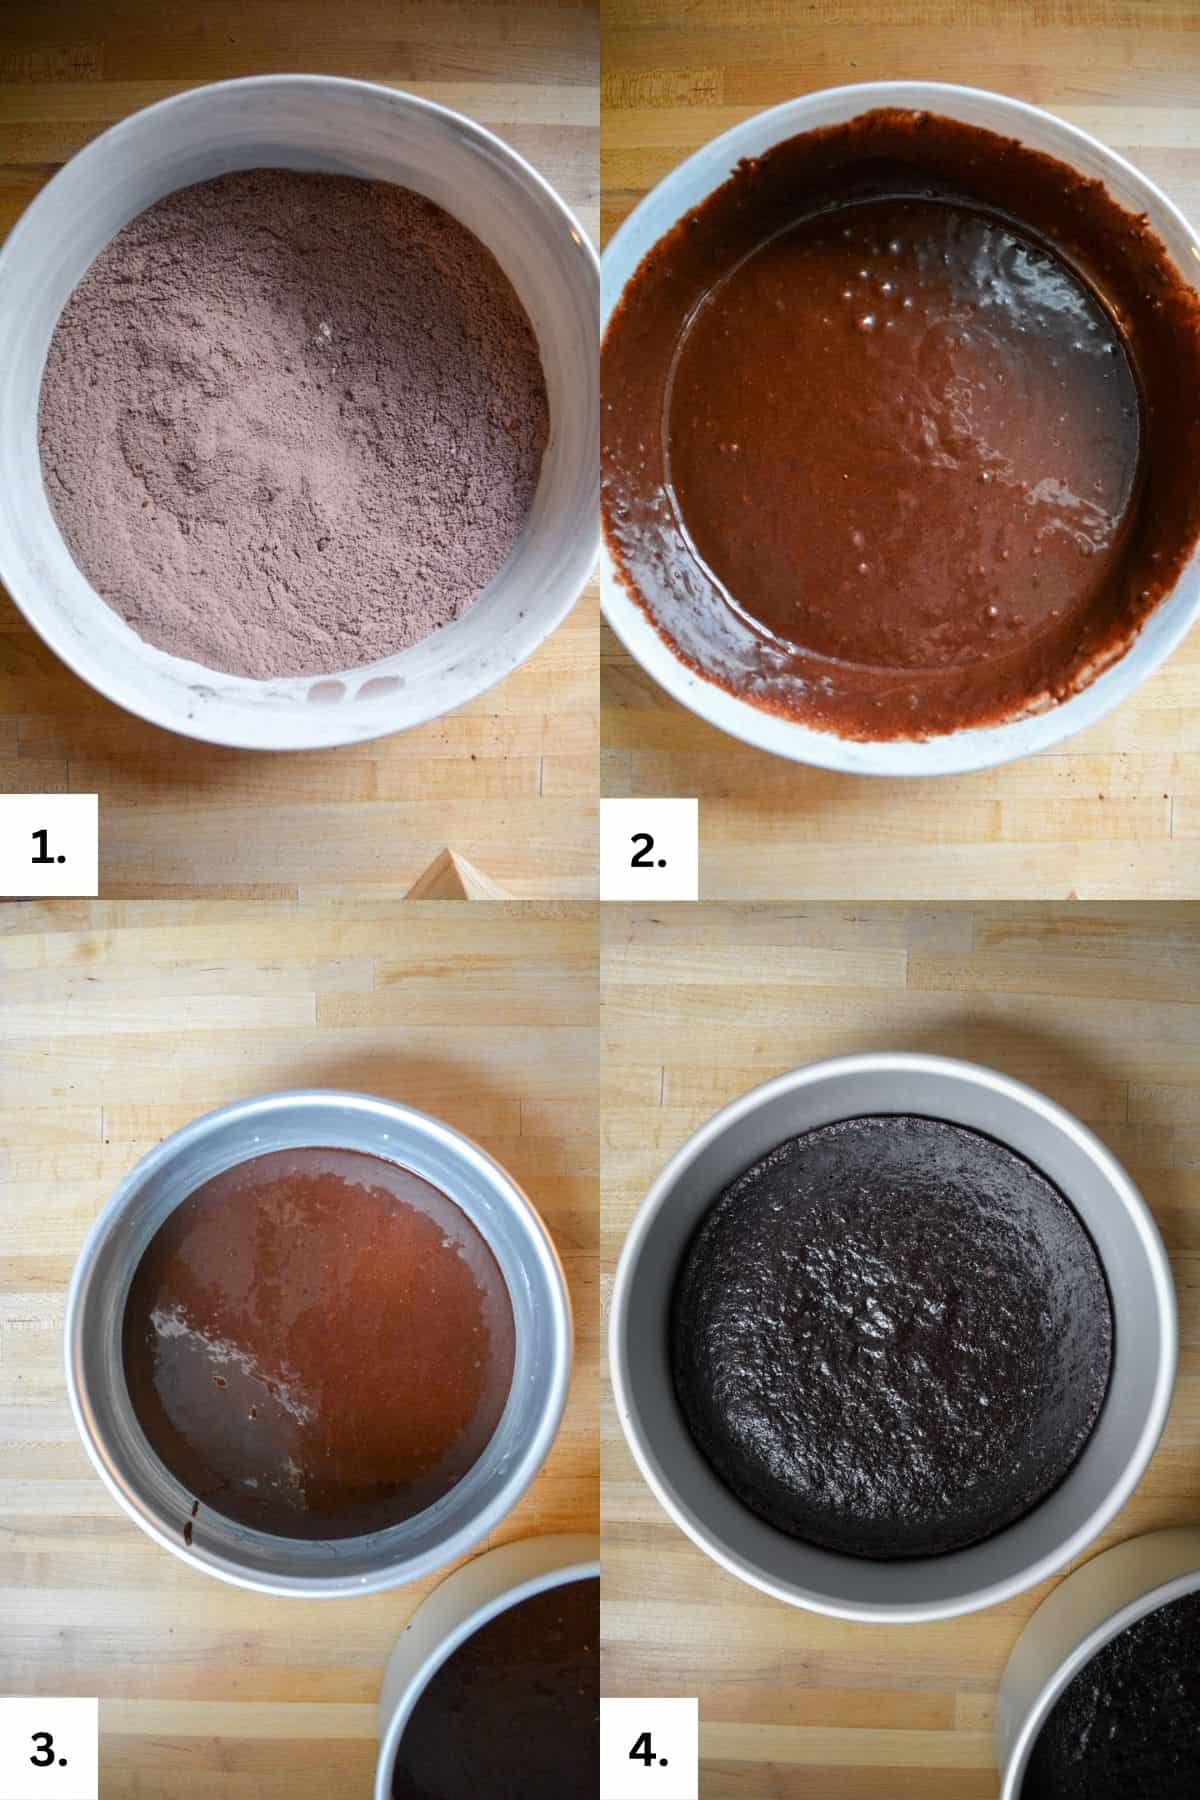 Step by step pictures of mixing and baking vegan chocolate cake batter.